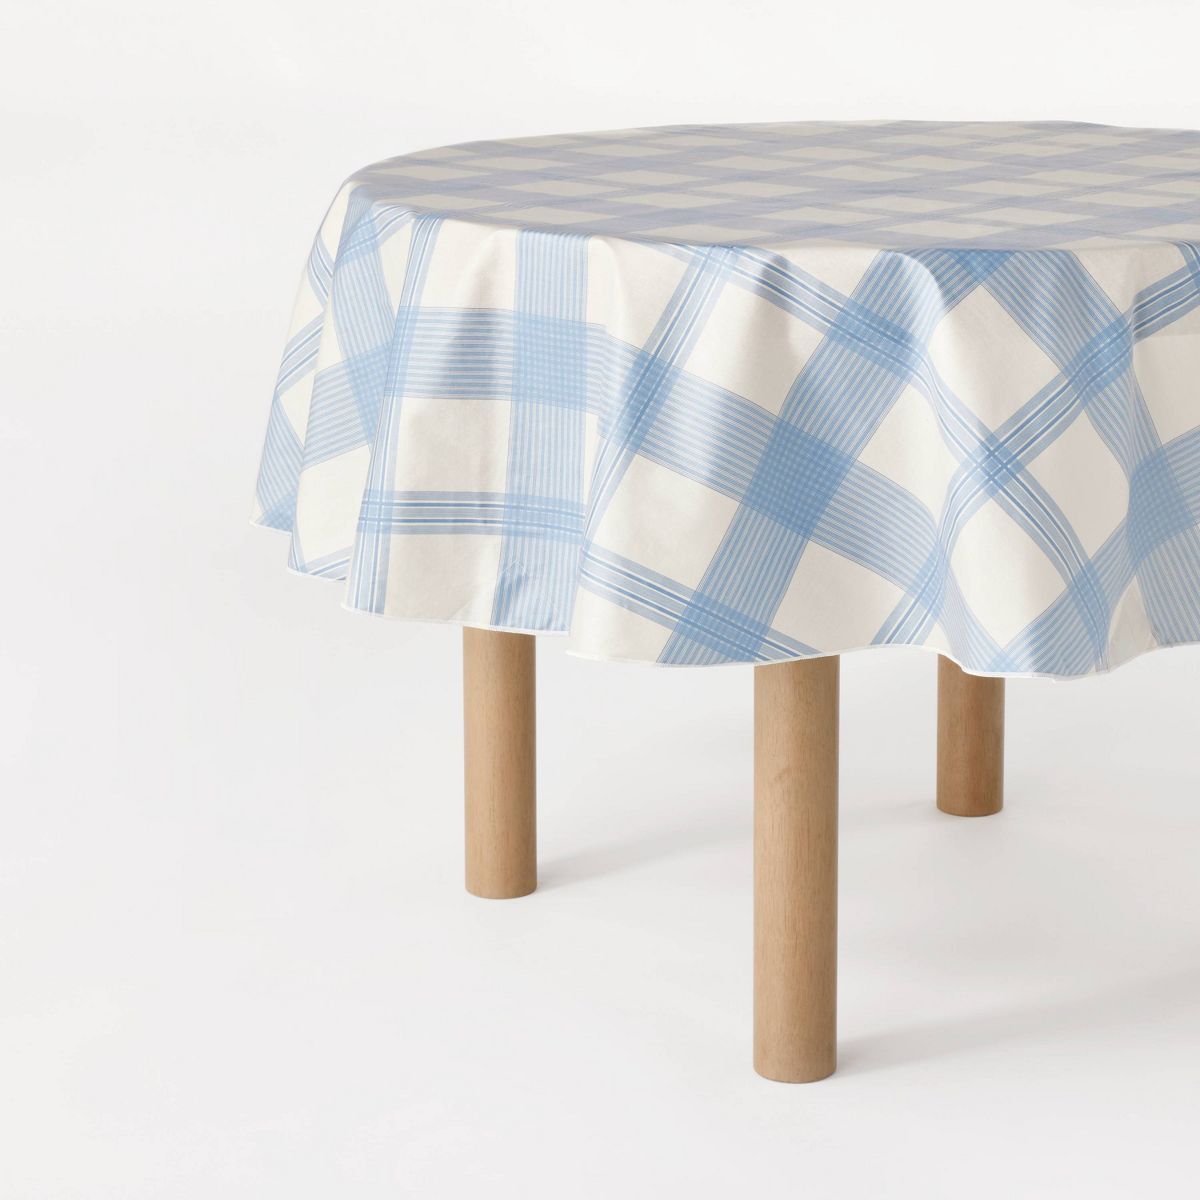 70" Round Oiled Tablecloth Blue Plaid - Threshold™ designed with Studio McGee | Target